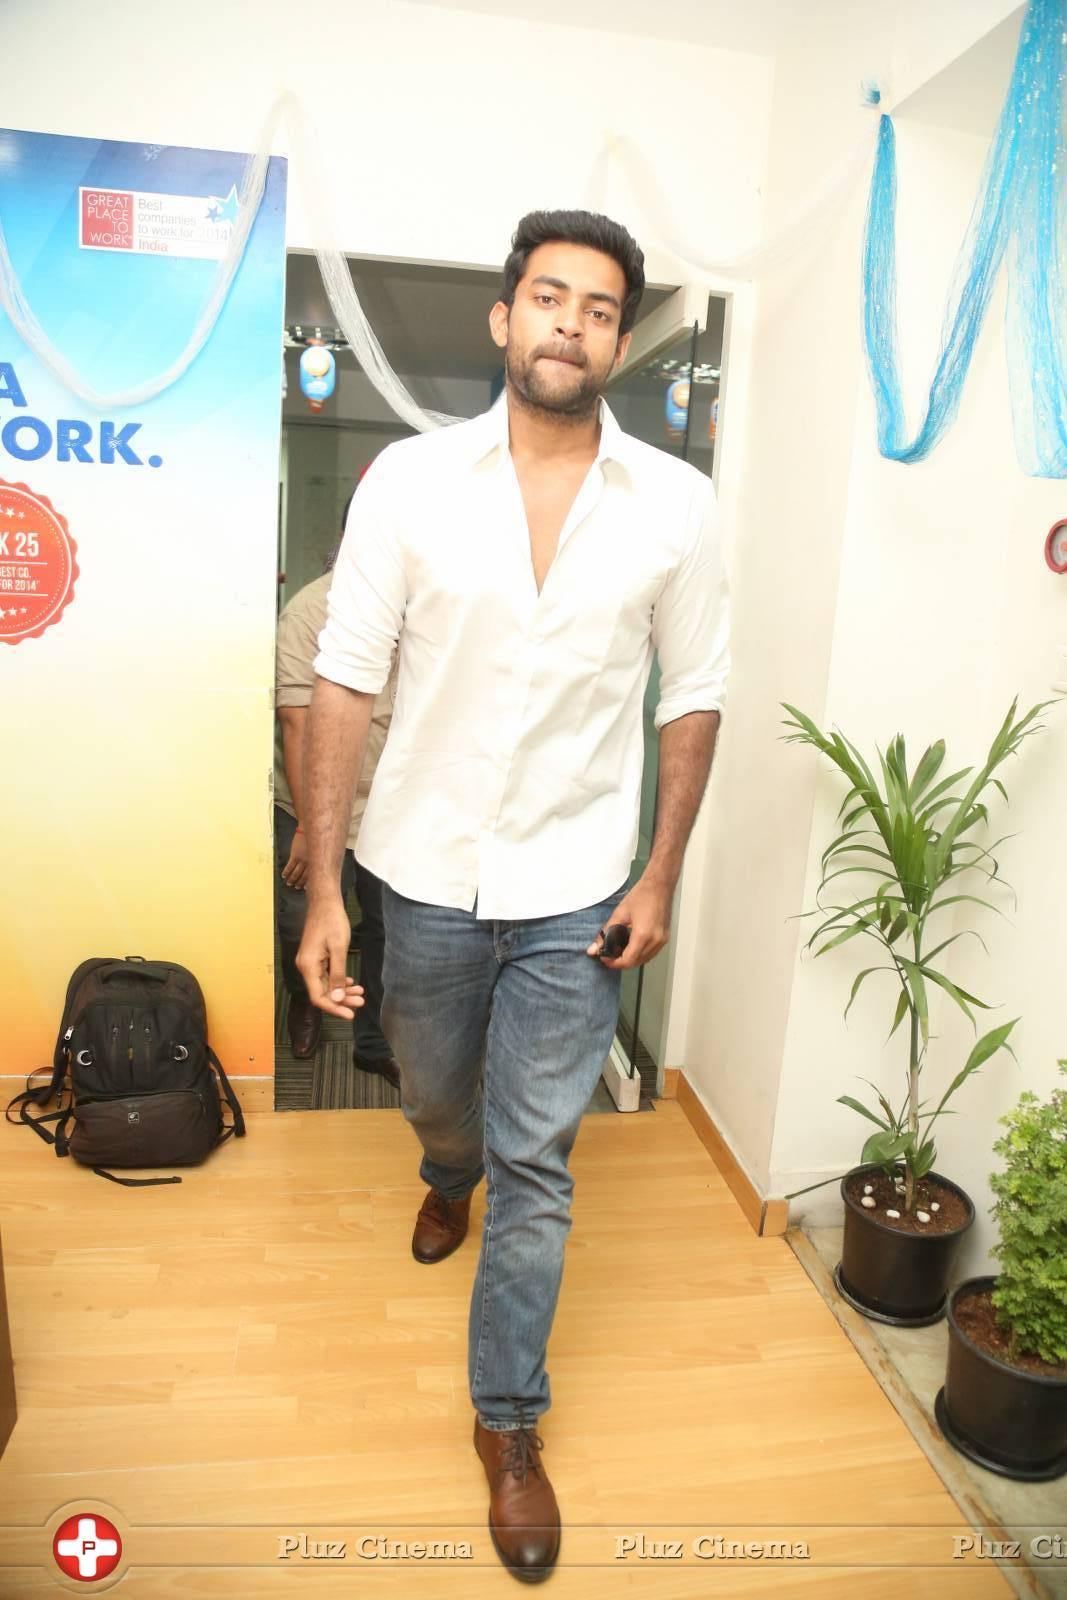 Varun Tej - Kanche Movie Song Launch at Radio City Stills | Picture 1119370